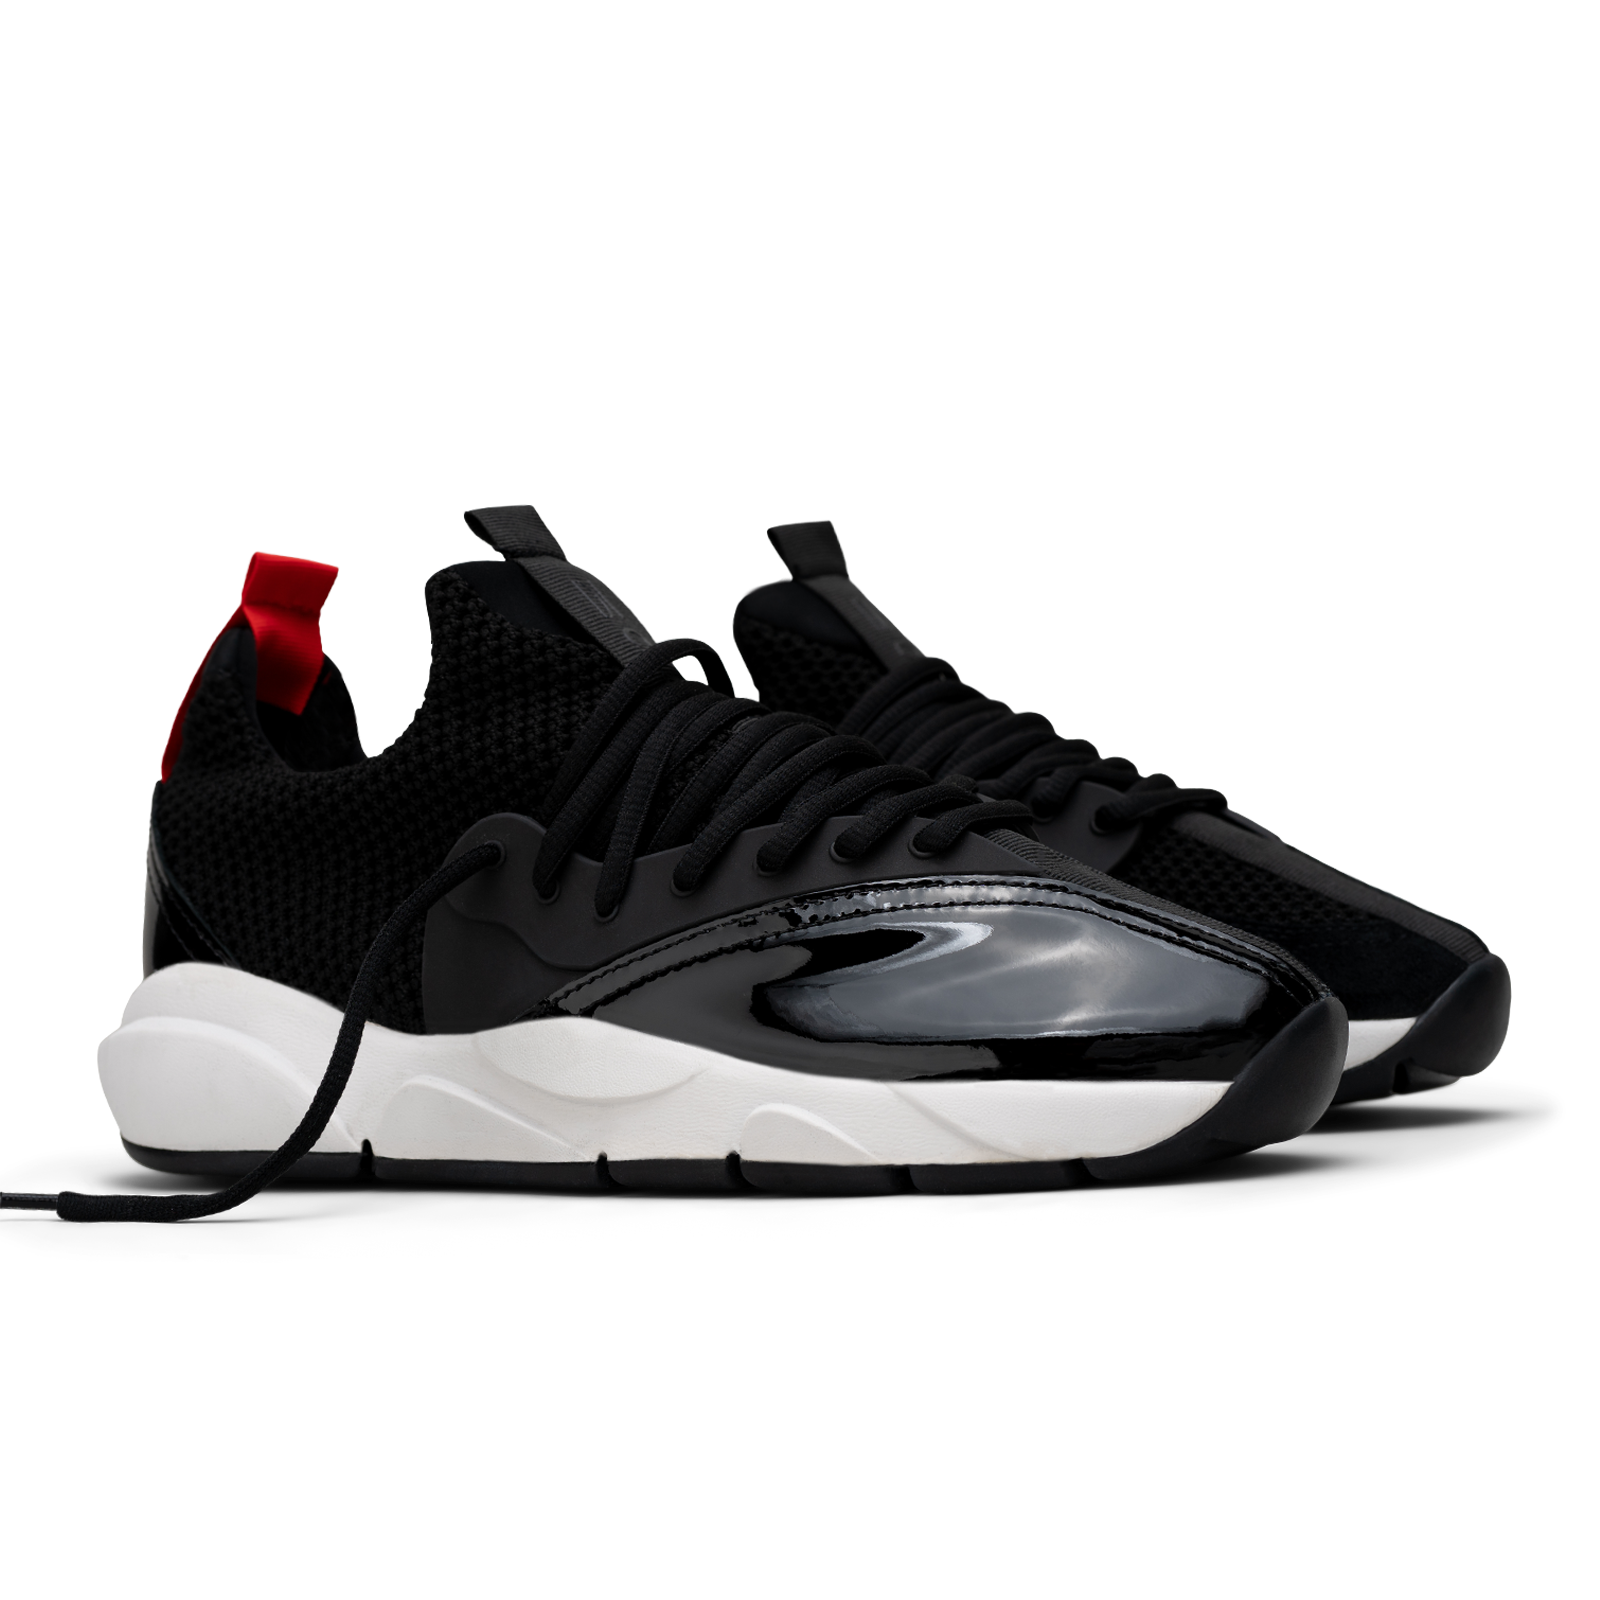 3/4 view, Cloudstryk Advantage is a runner with Black patent leather and suede overlays zoom mesh underlays, red heel pull molded lace holder, white eva midsol and a translucent black rubber outsole.